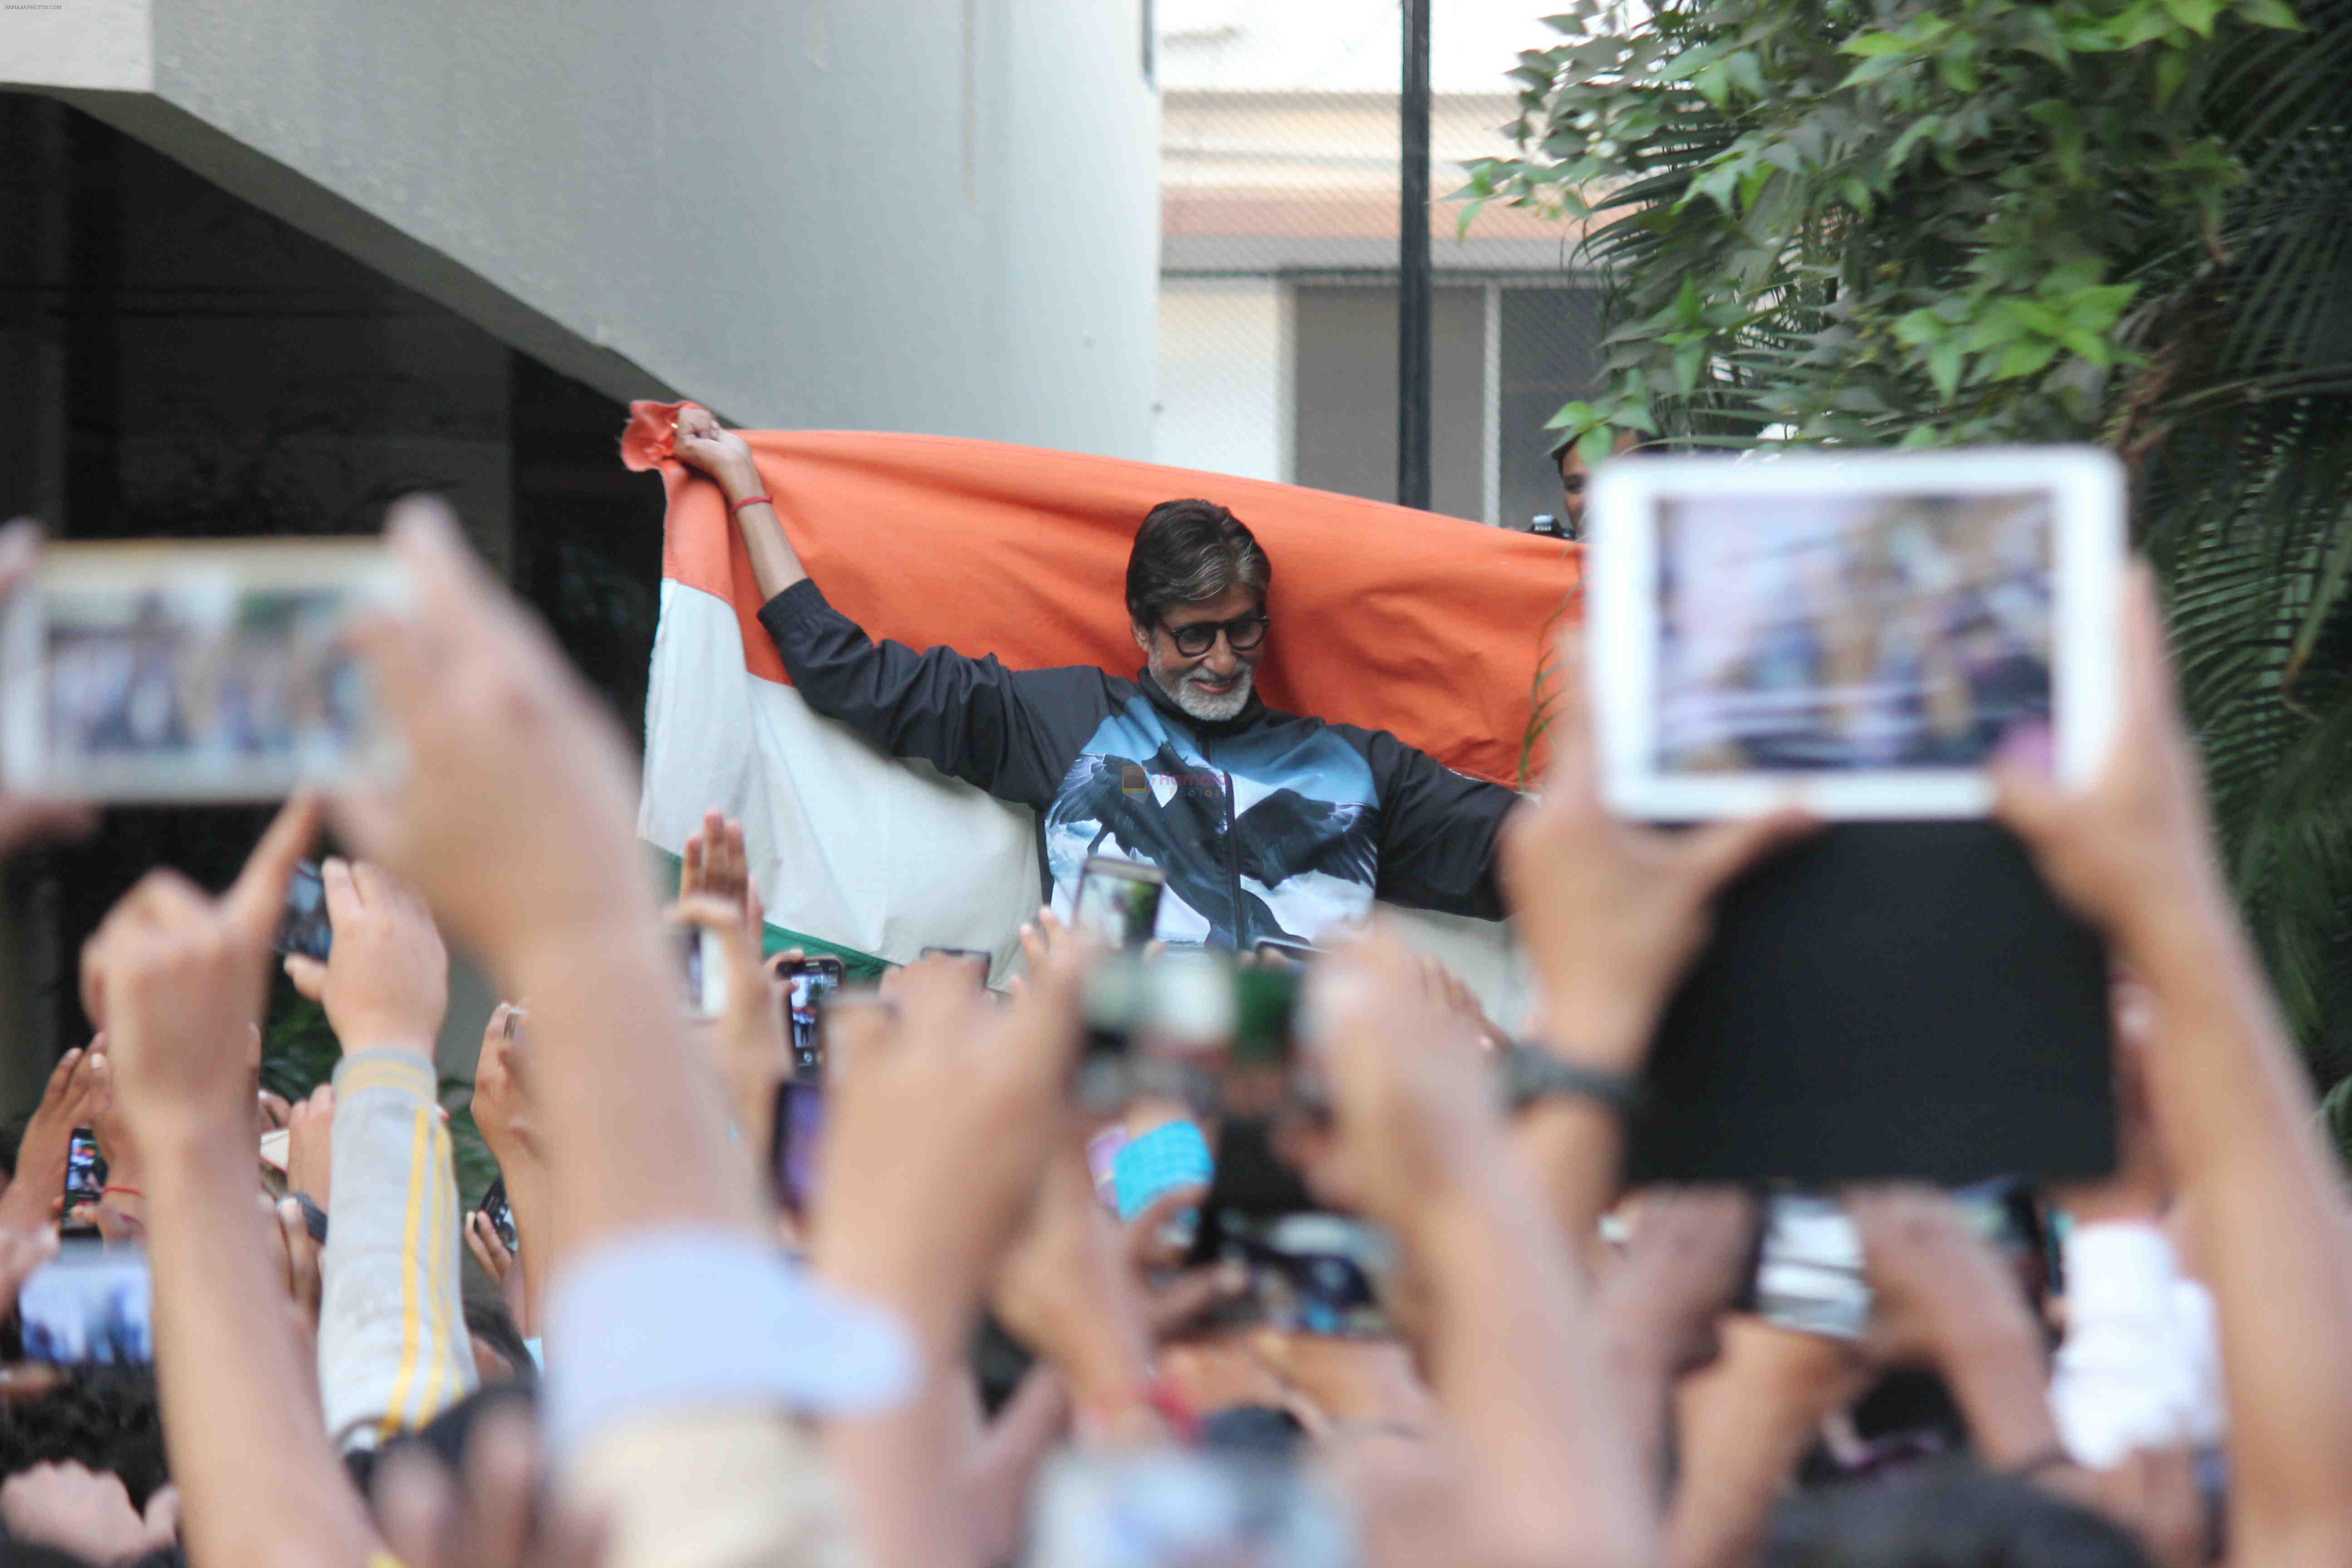 Amitabh Bachchan celebrates with fans India's world cup win over Pakistan at his residence Jalsa in Mumbai on 15th Feb 2015